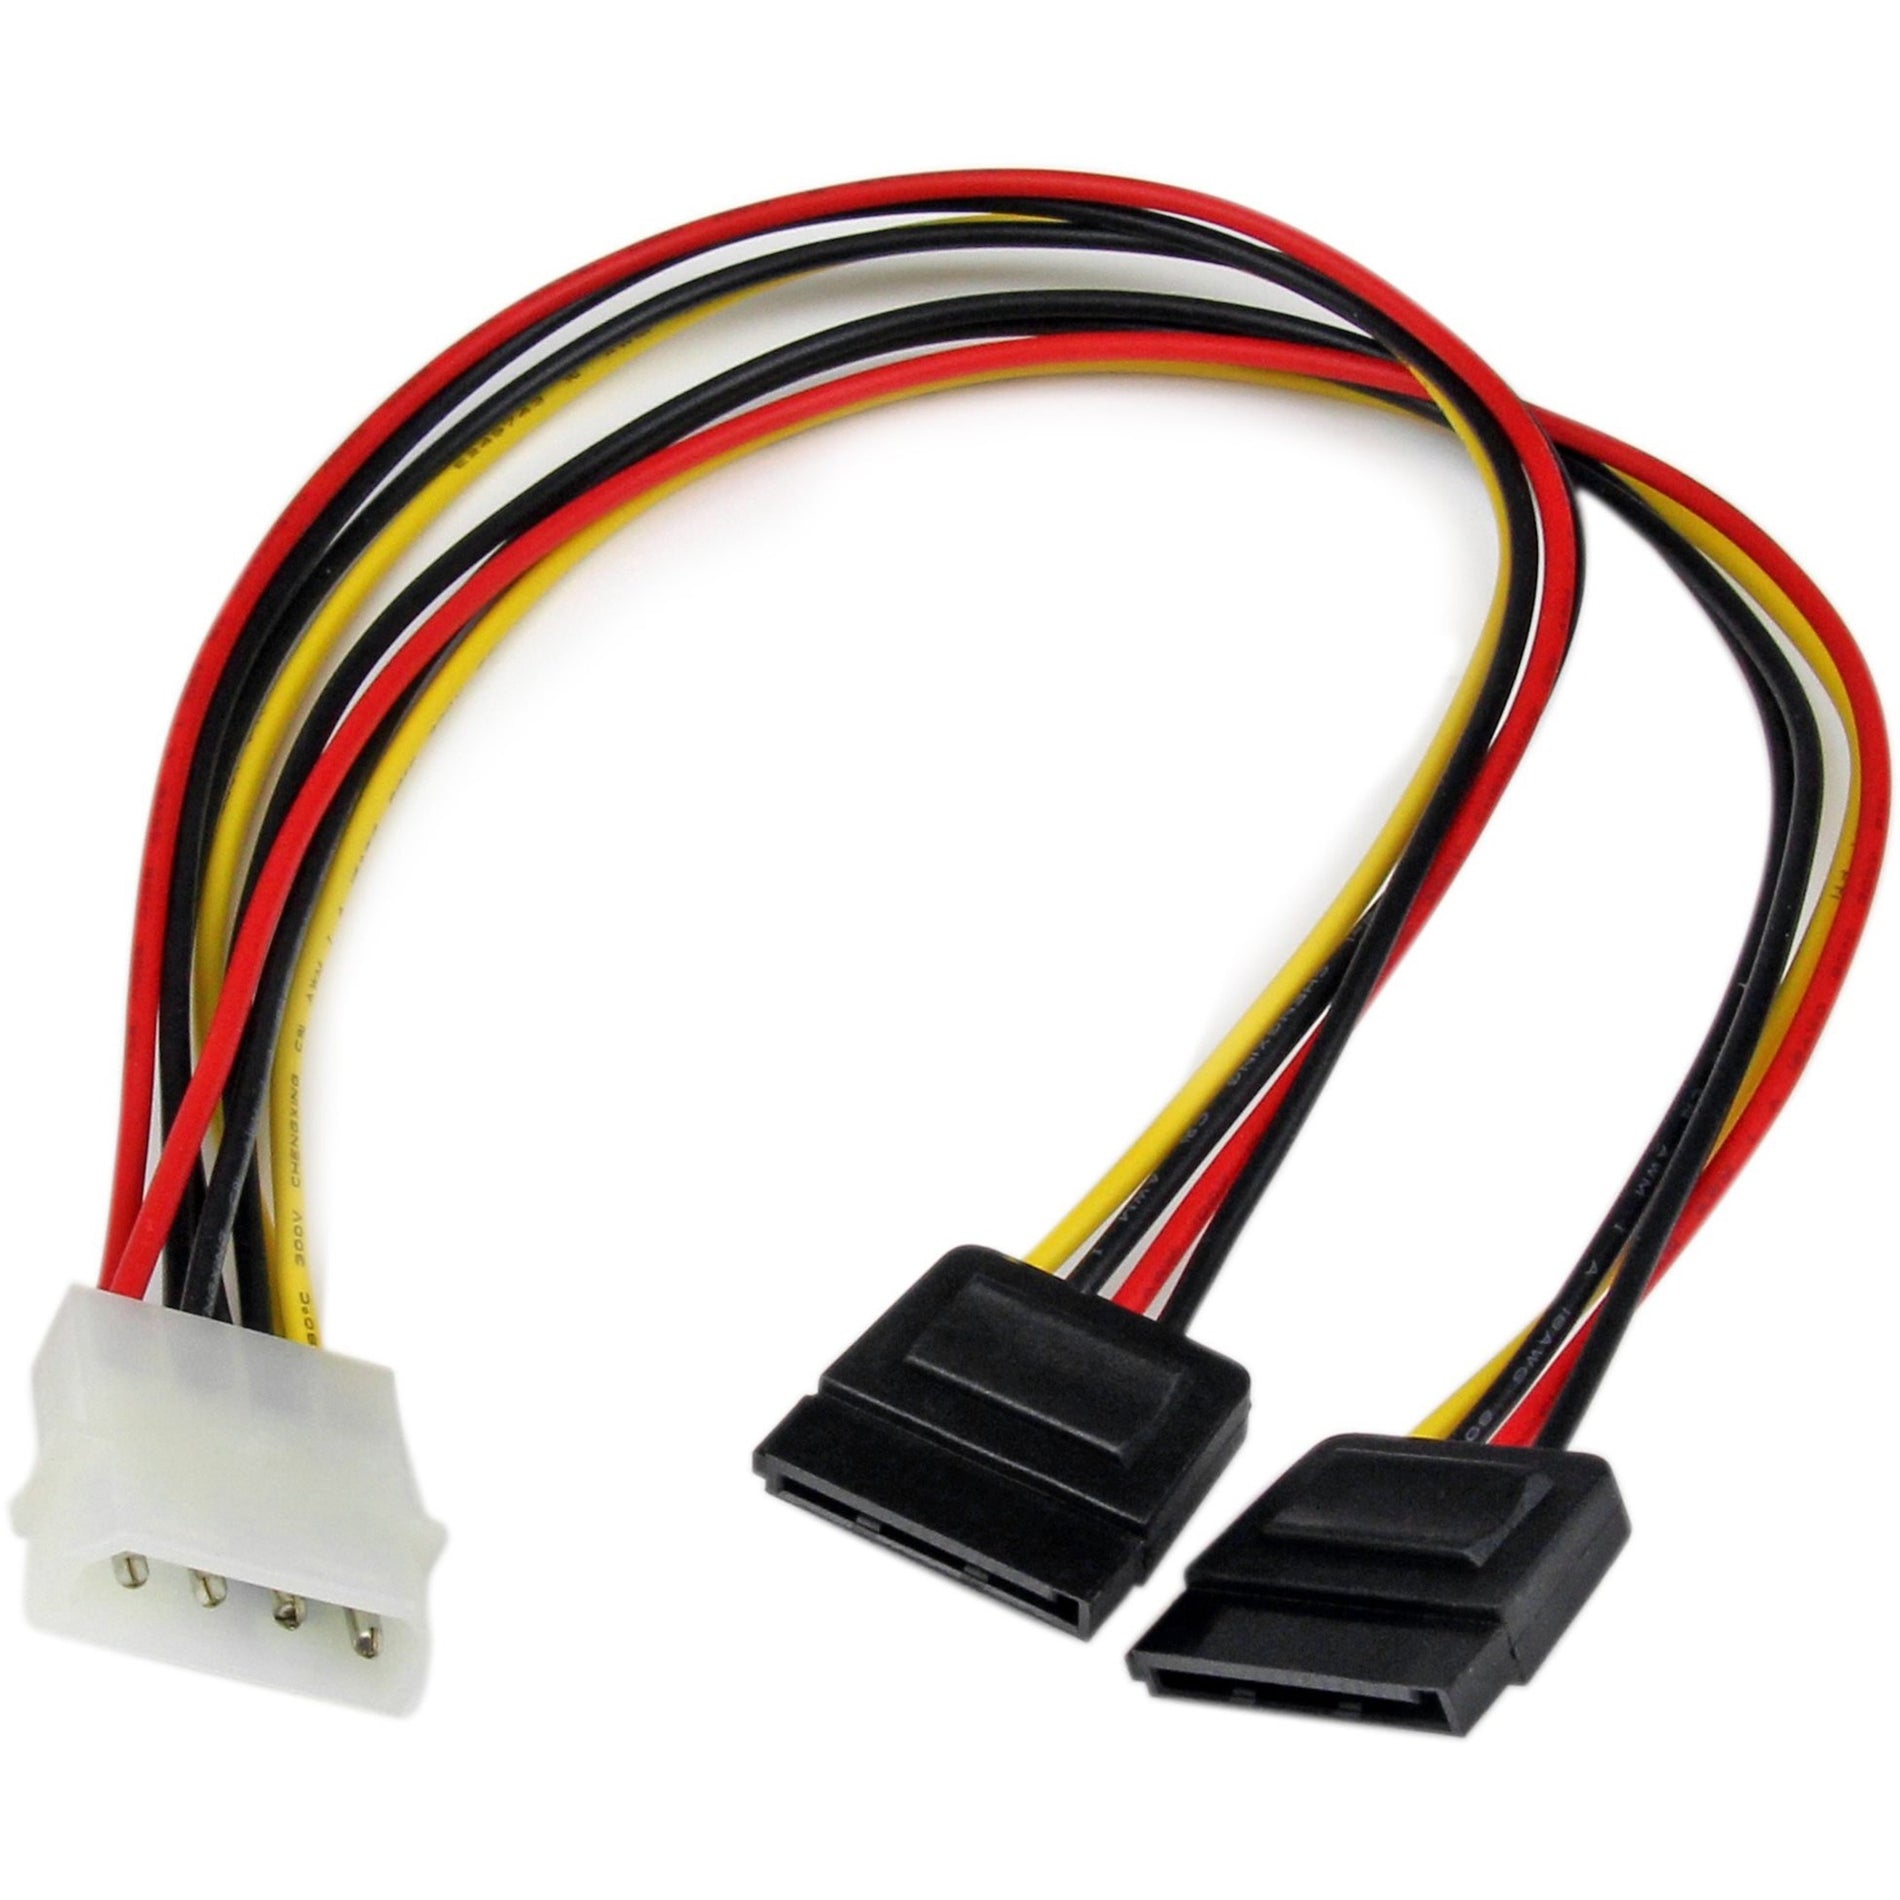 StarTech.com PYO2LP4SATA 12in LP4 to 2x SATA Power Y Cable Adapter Connect SATA Drives with Ease Startech 星塔科技